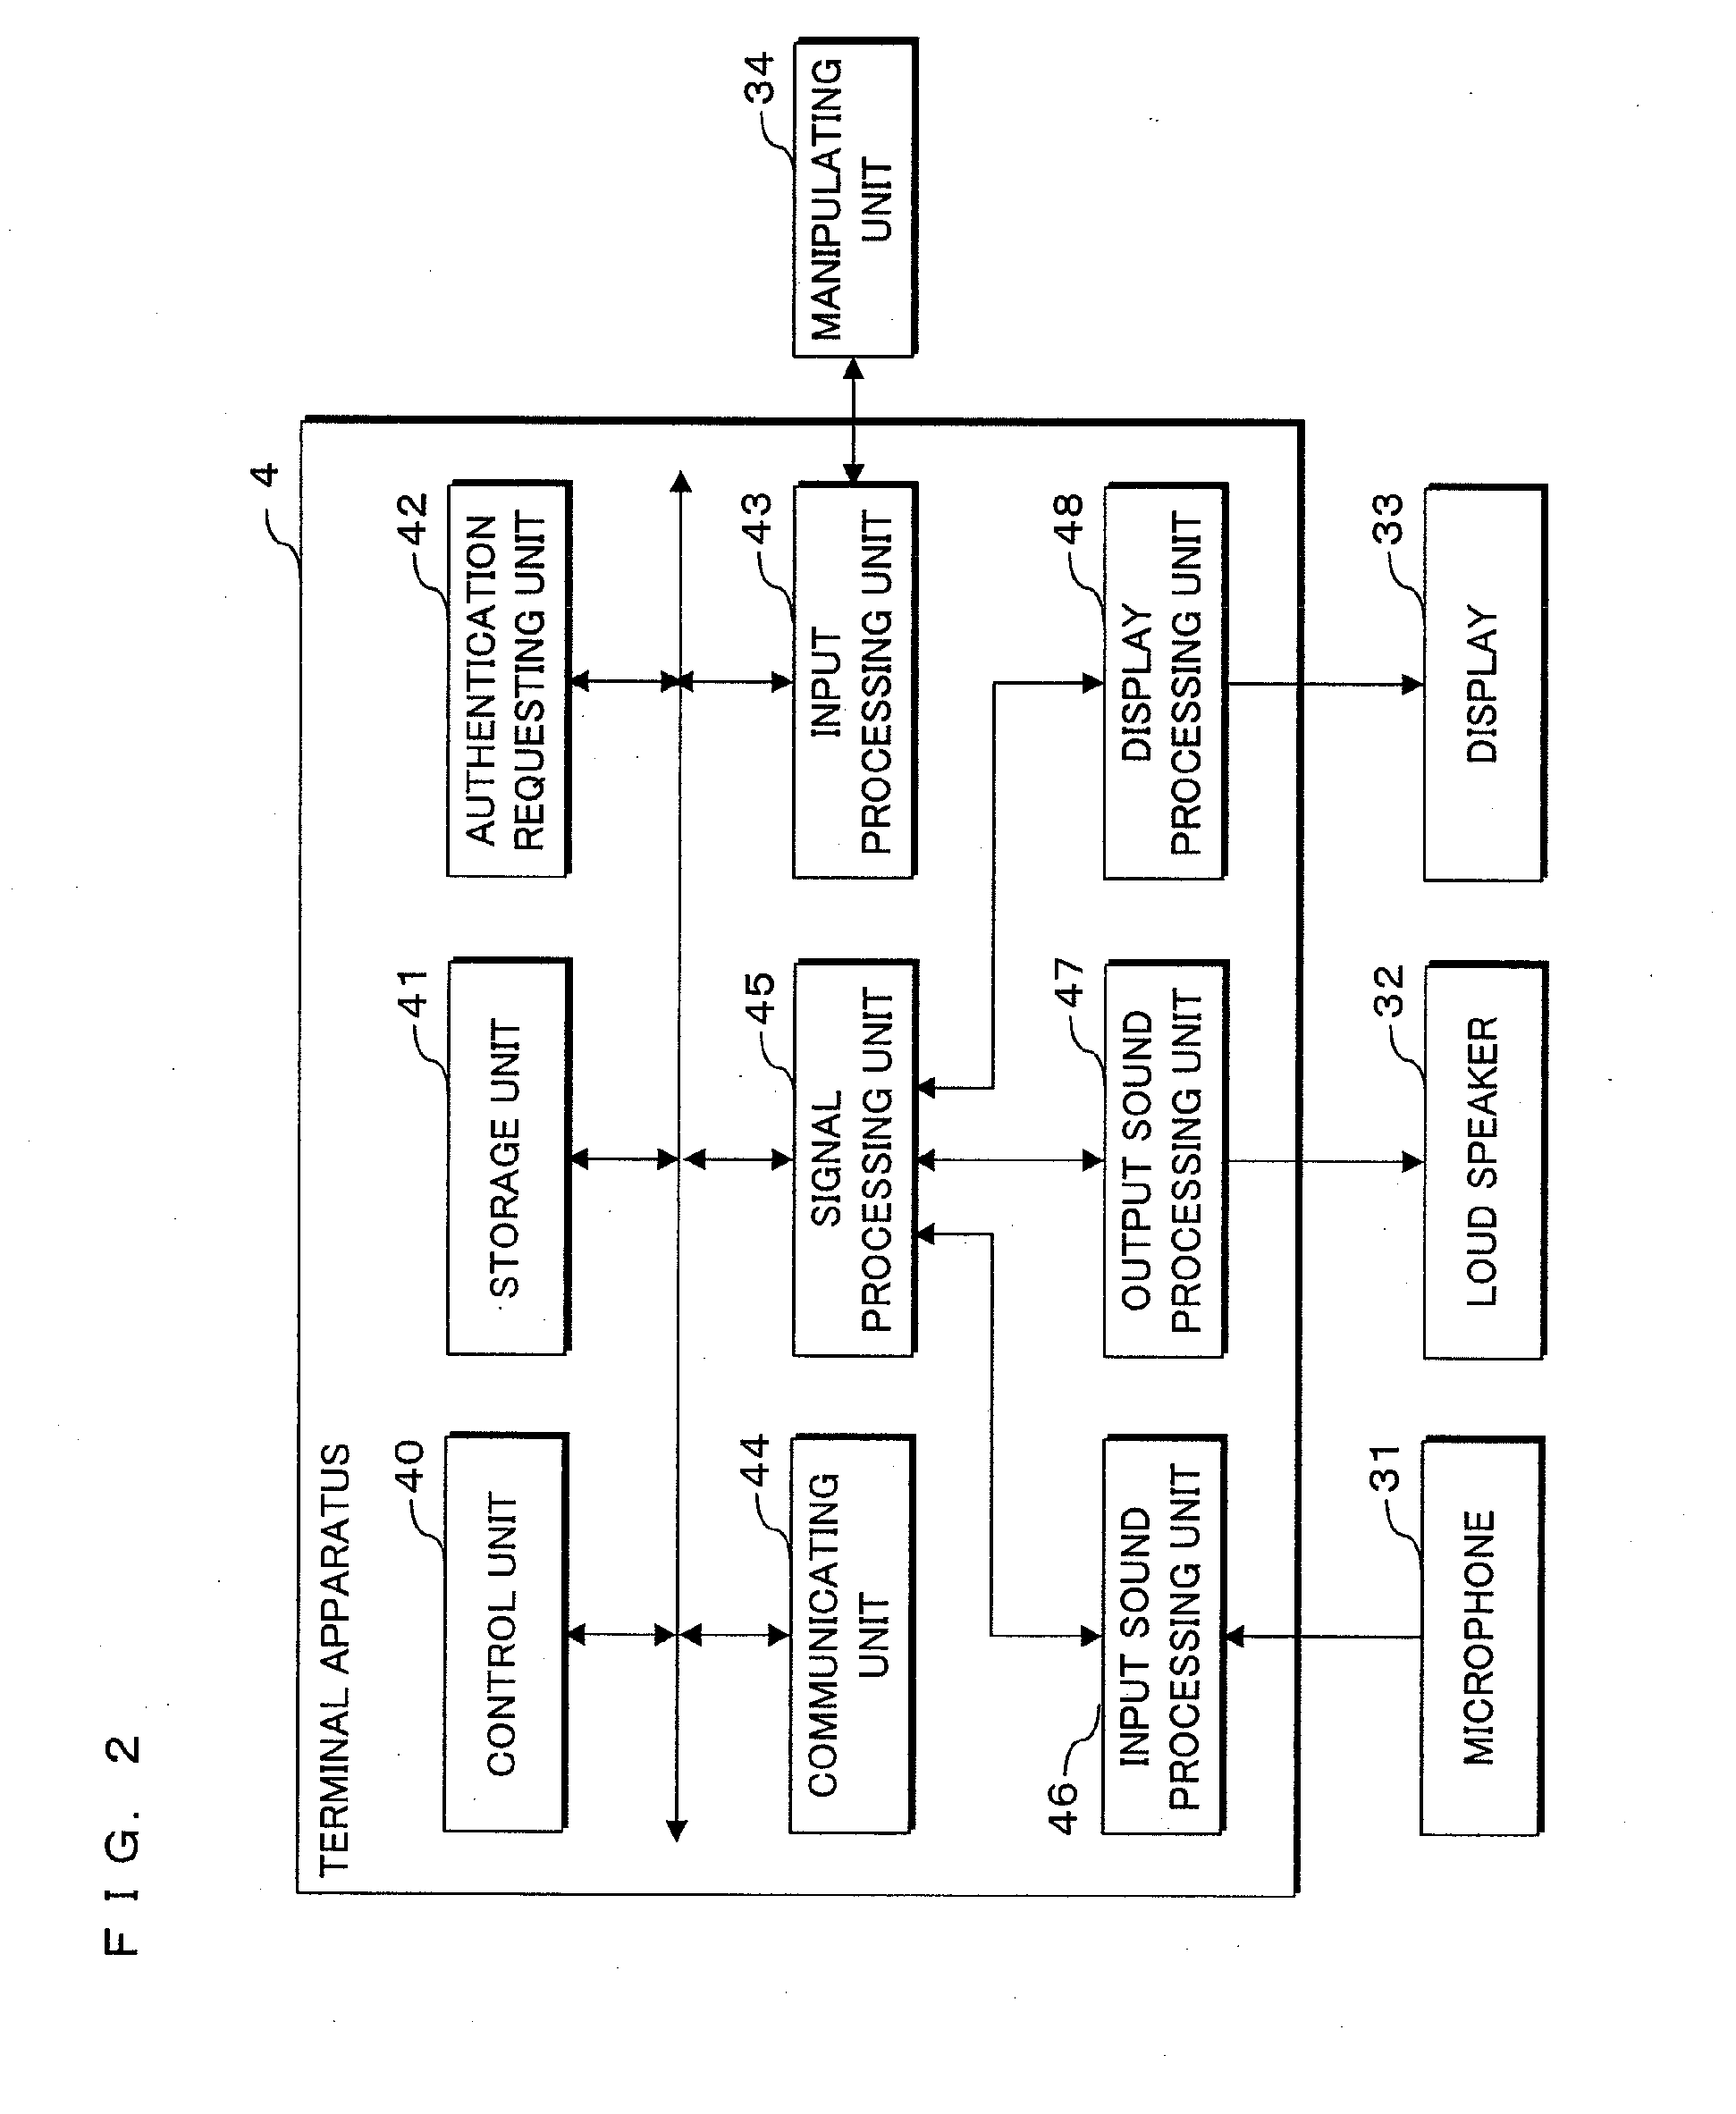 Conference relay apparatus and conference system